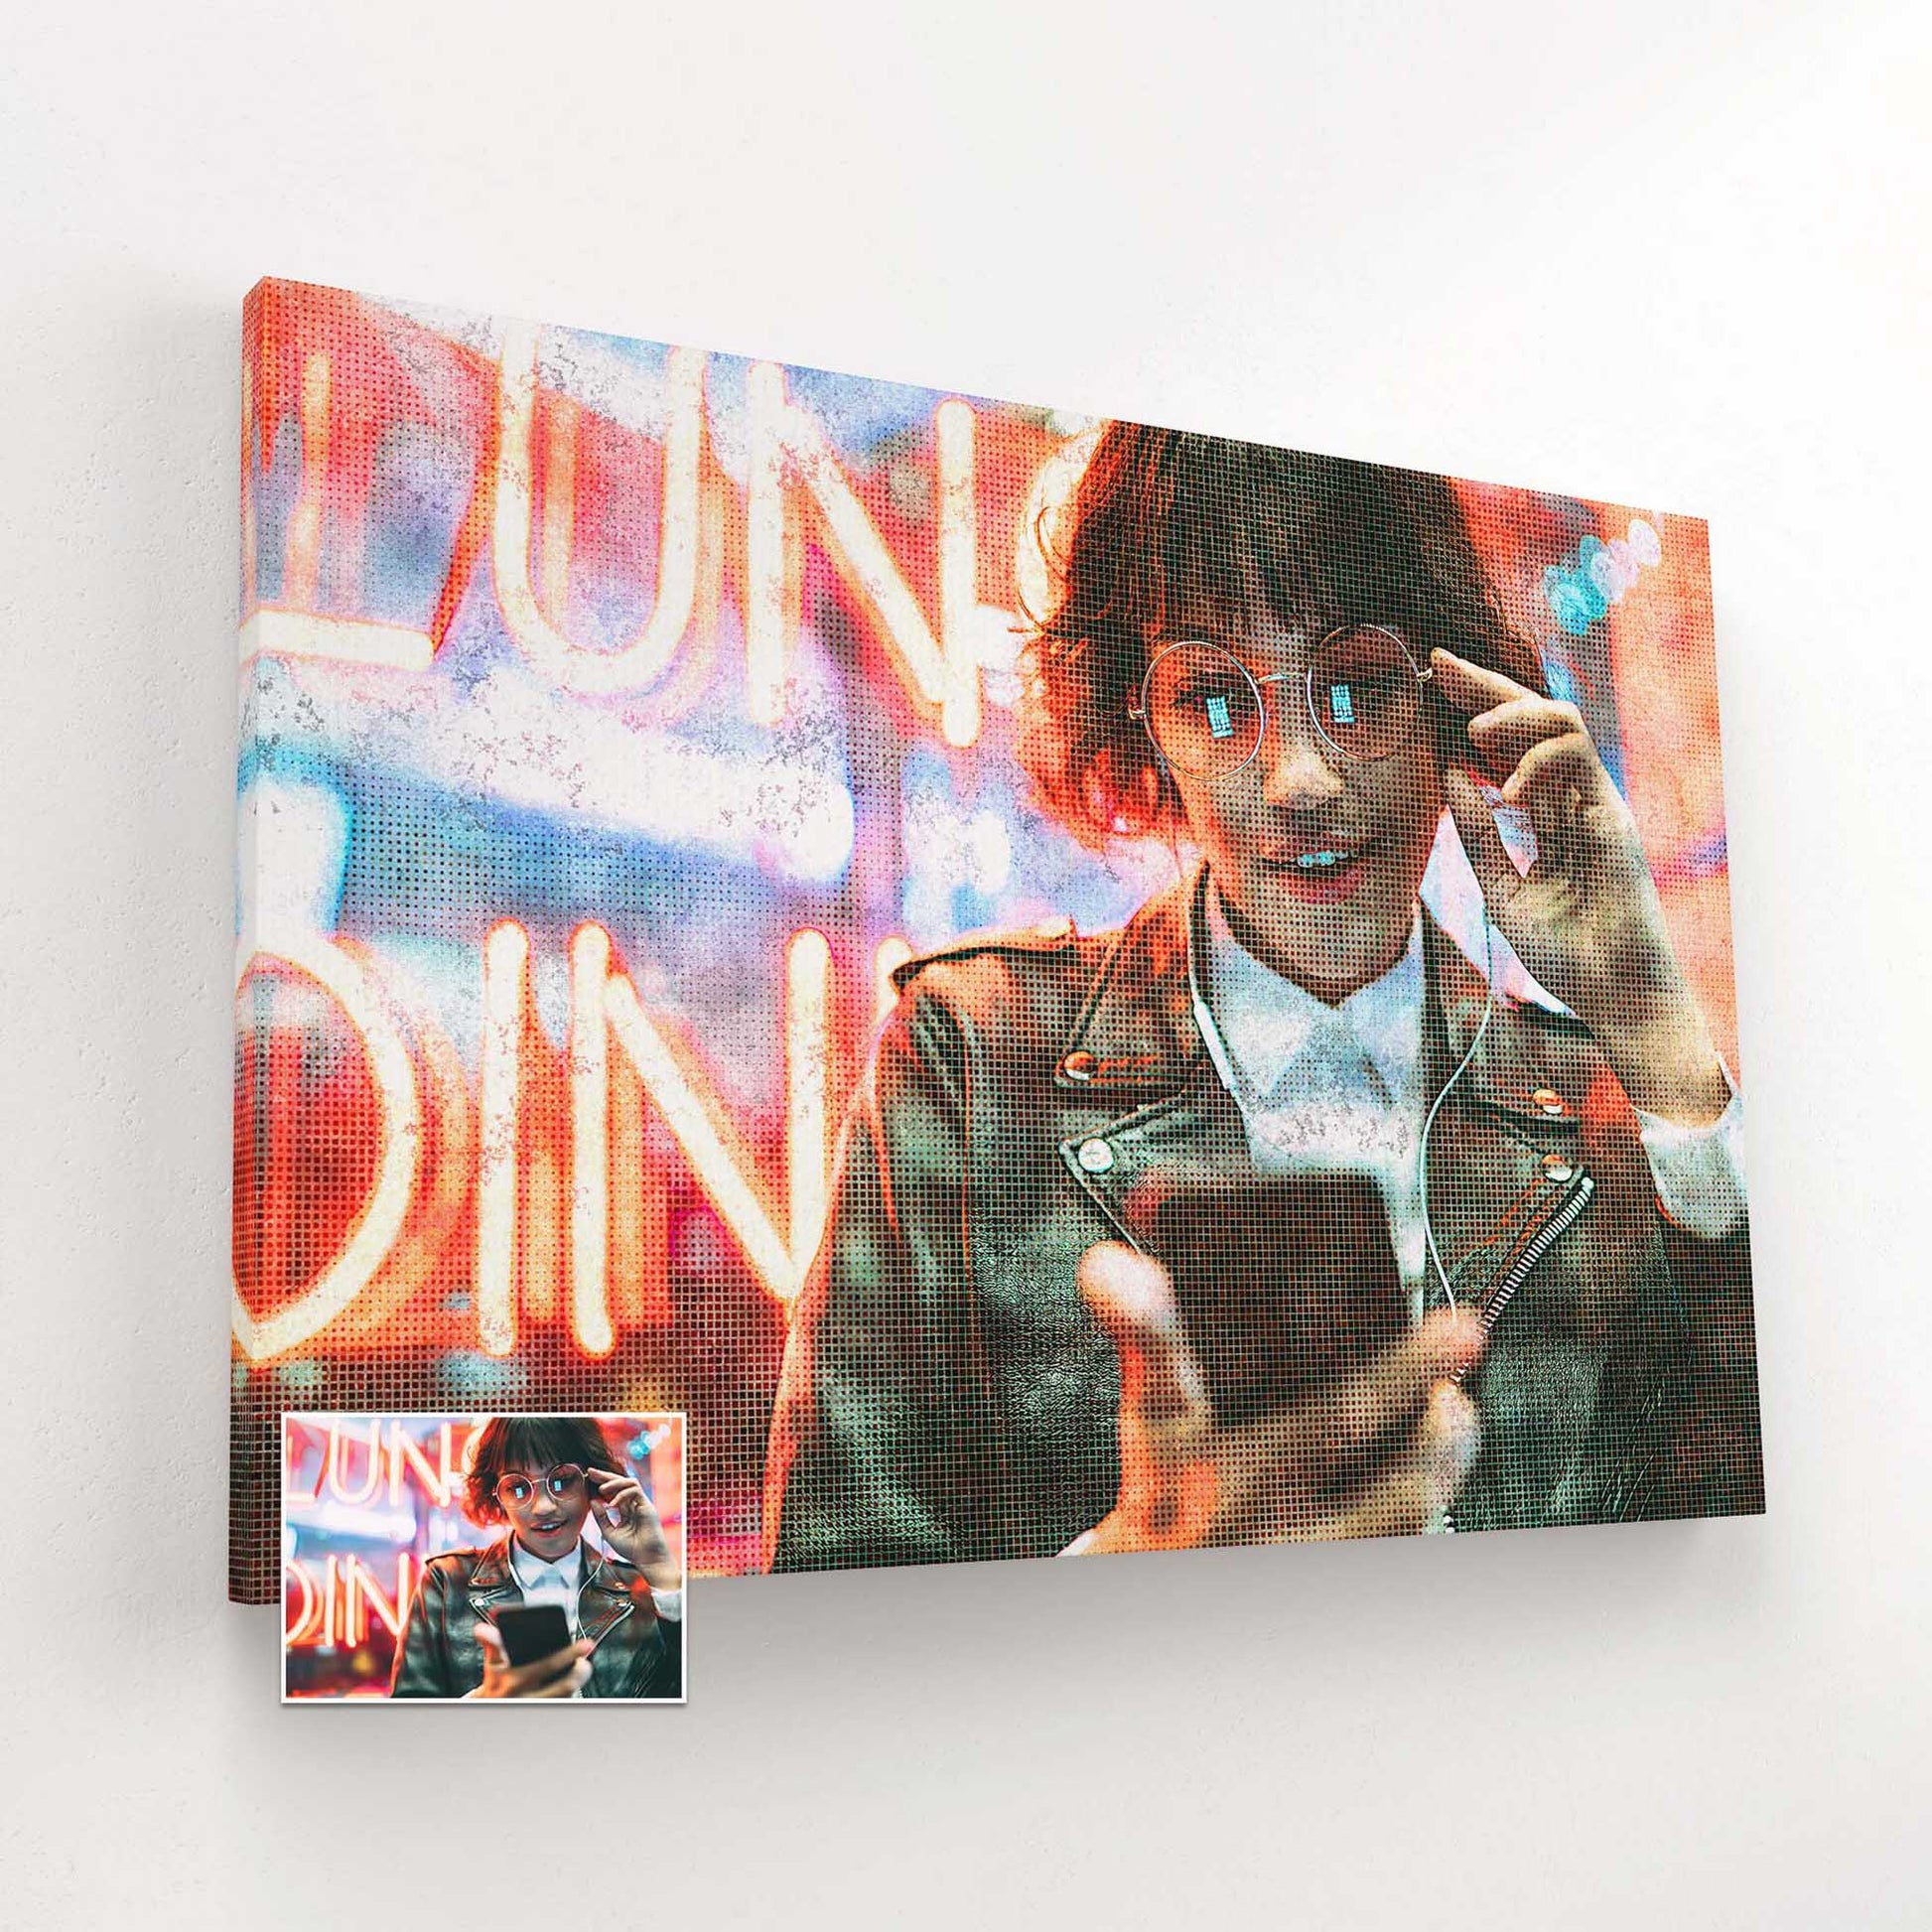 Step back in time with our Personalised Retro Grunge FX Canvas. Embrace the cool and trendy 90s vibe as you transform your favorite photo into a unique piece of wall art. Its novelty design and creative flow evoke a sense of nostalgia